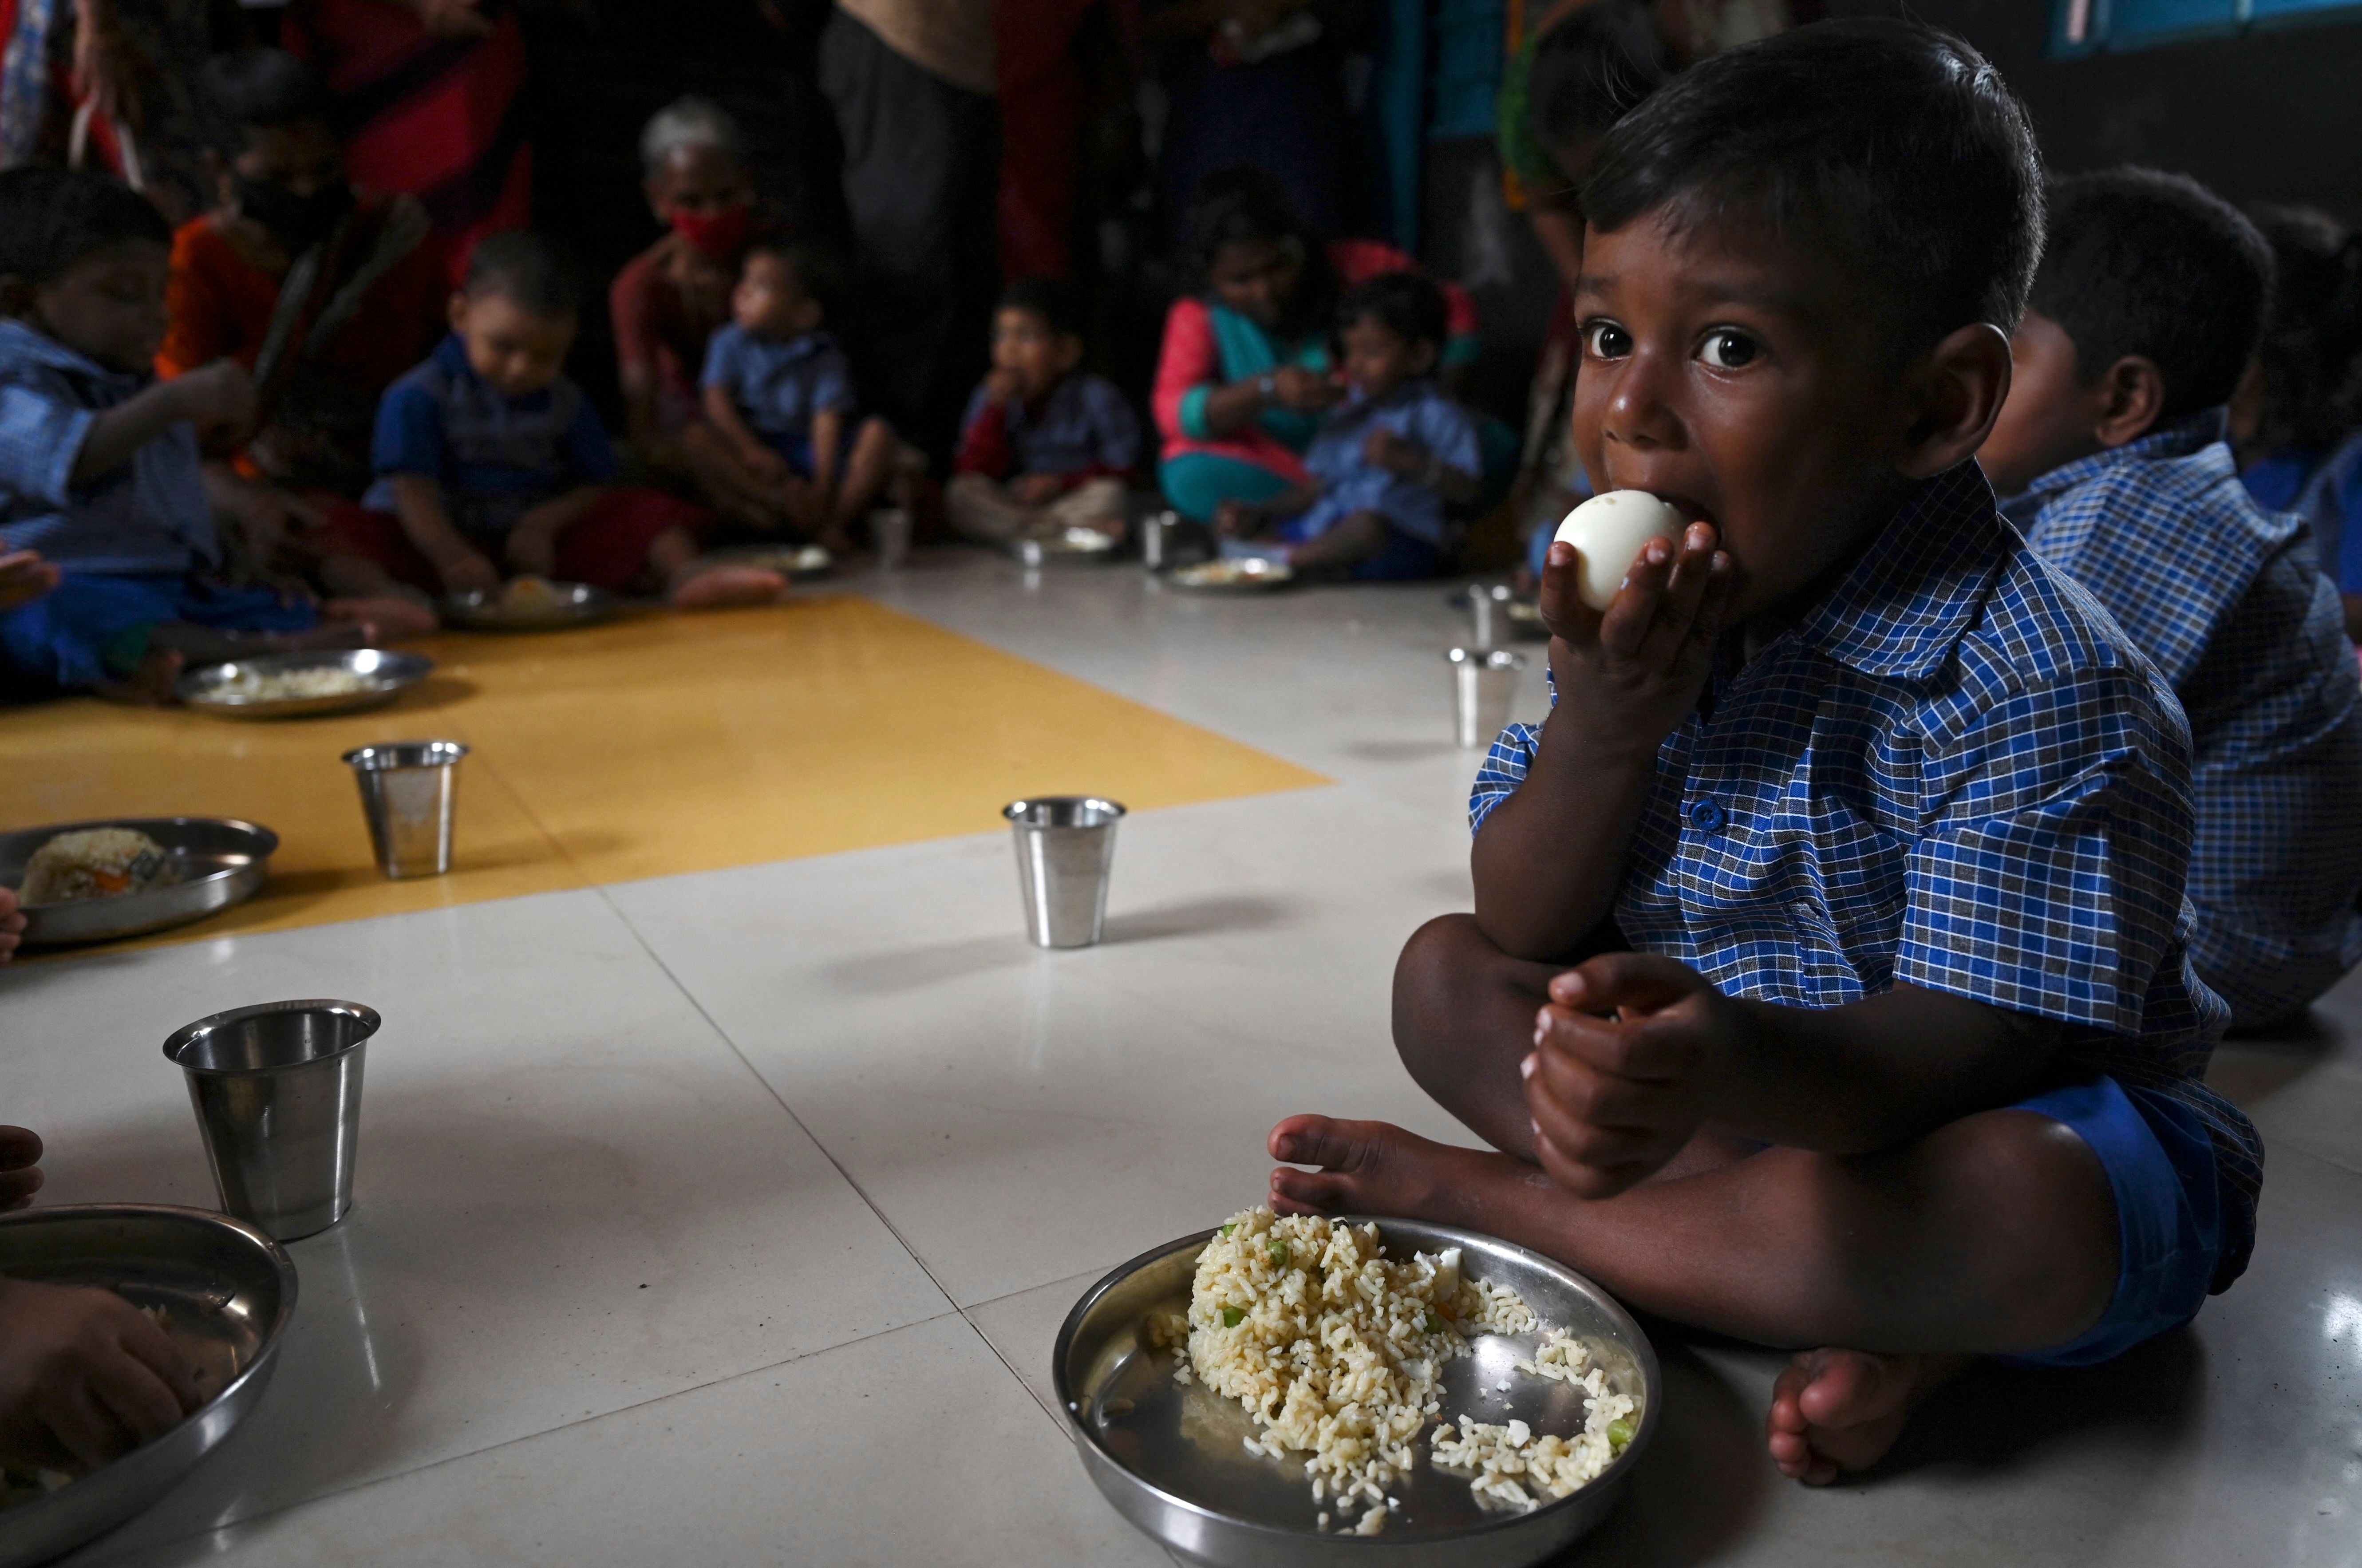 Children eat a meal at a pre-school in Chennai on 1 September 2021, after the state government relaxed the Covid-19 coronavirus lockdown norms for educational institutions, allowing students to attend physical classes